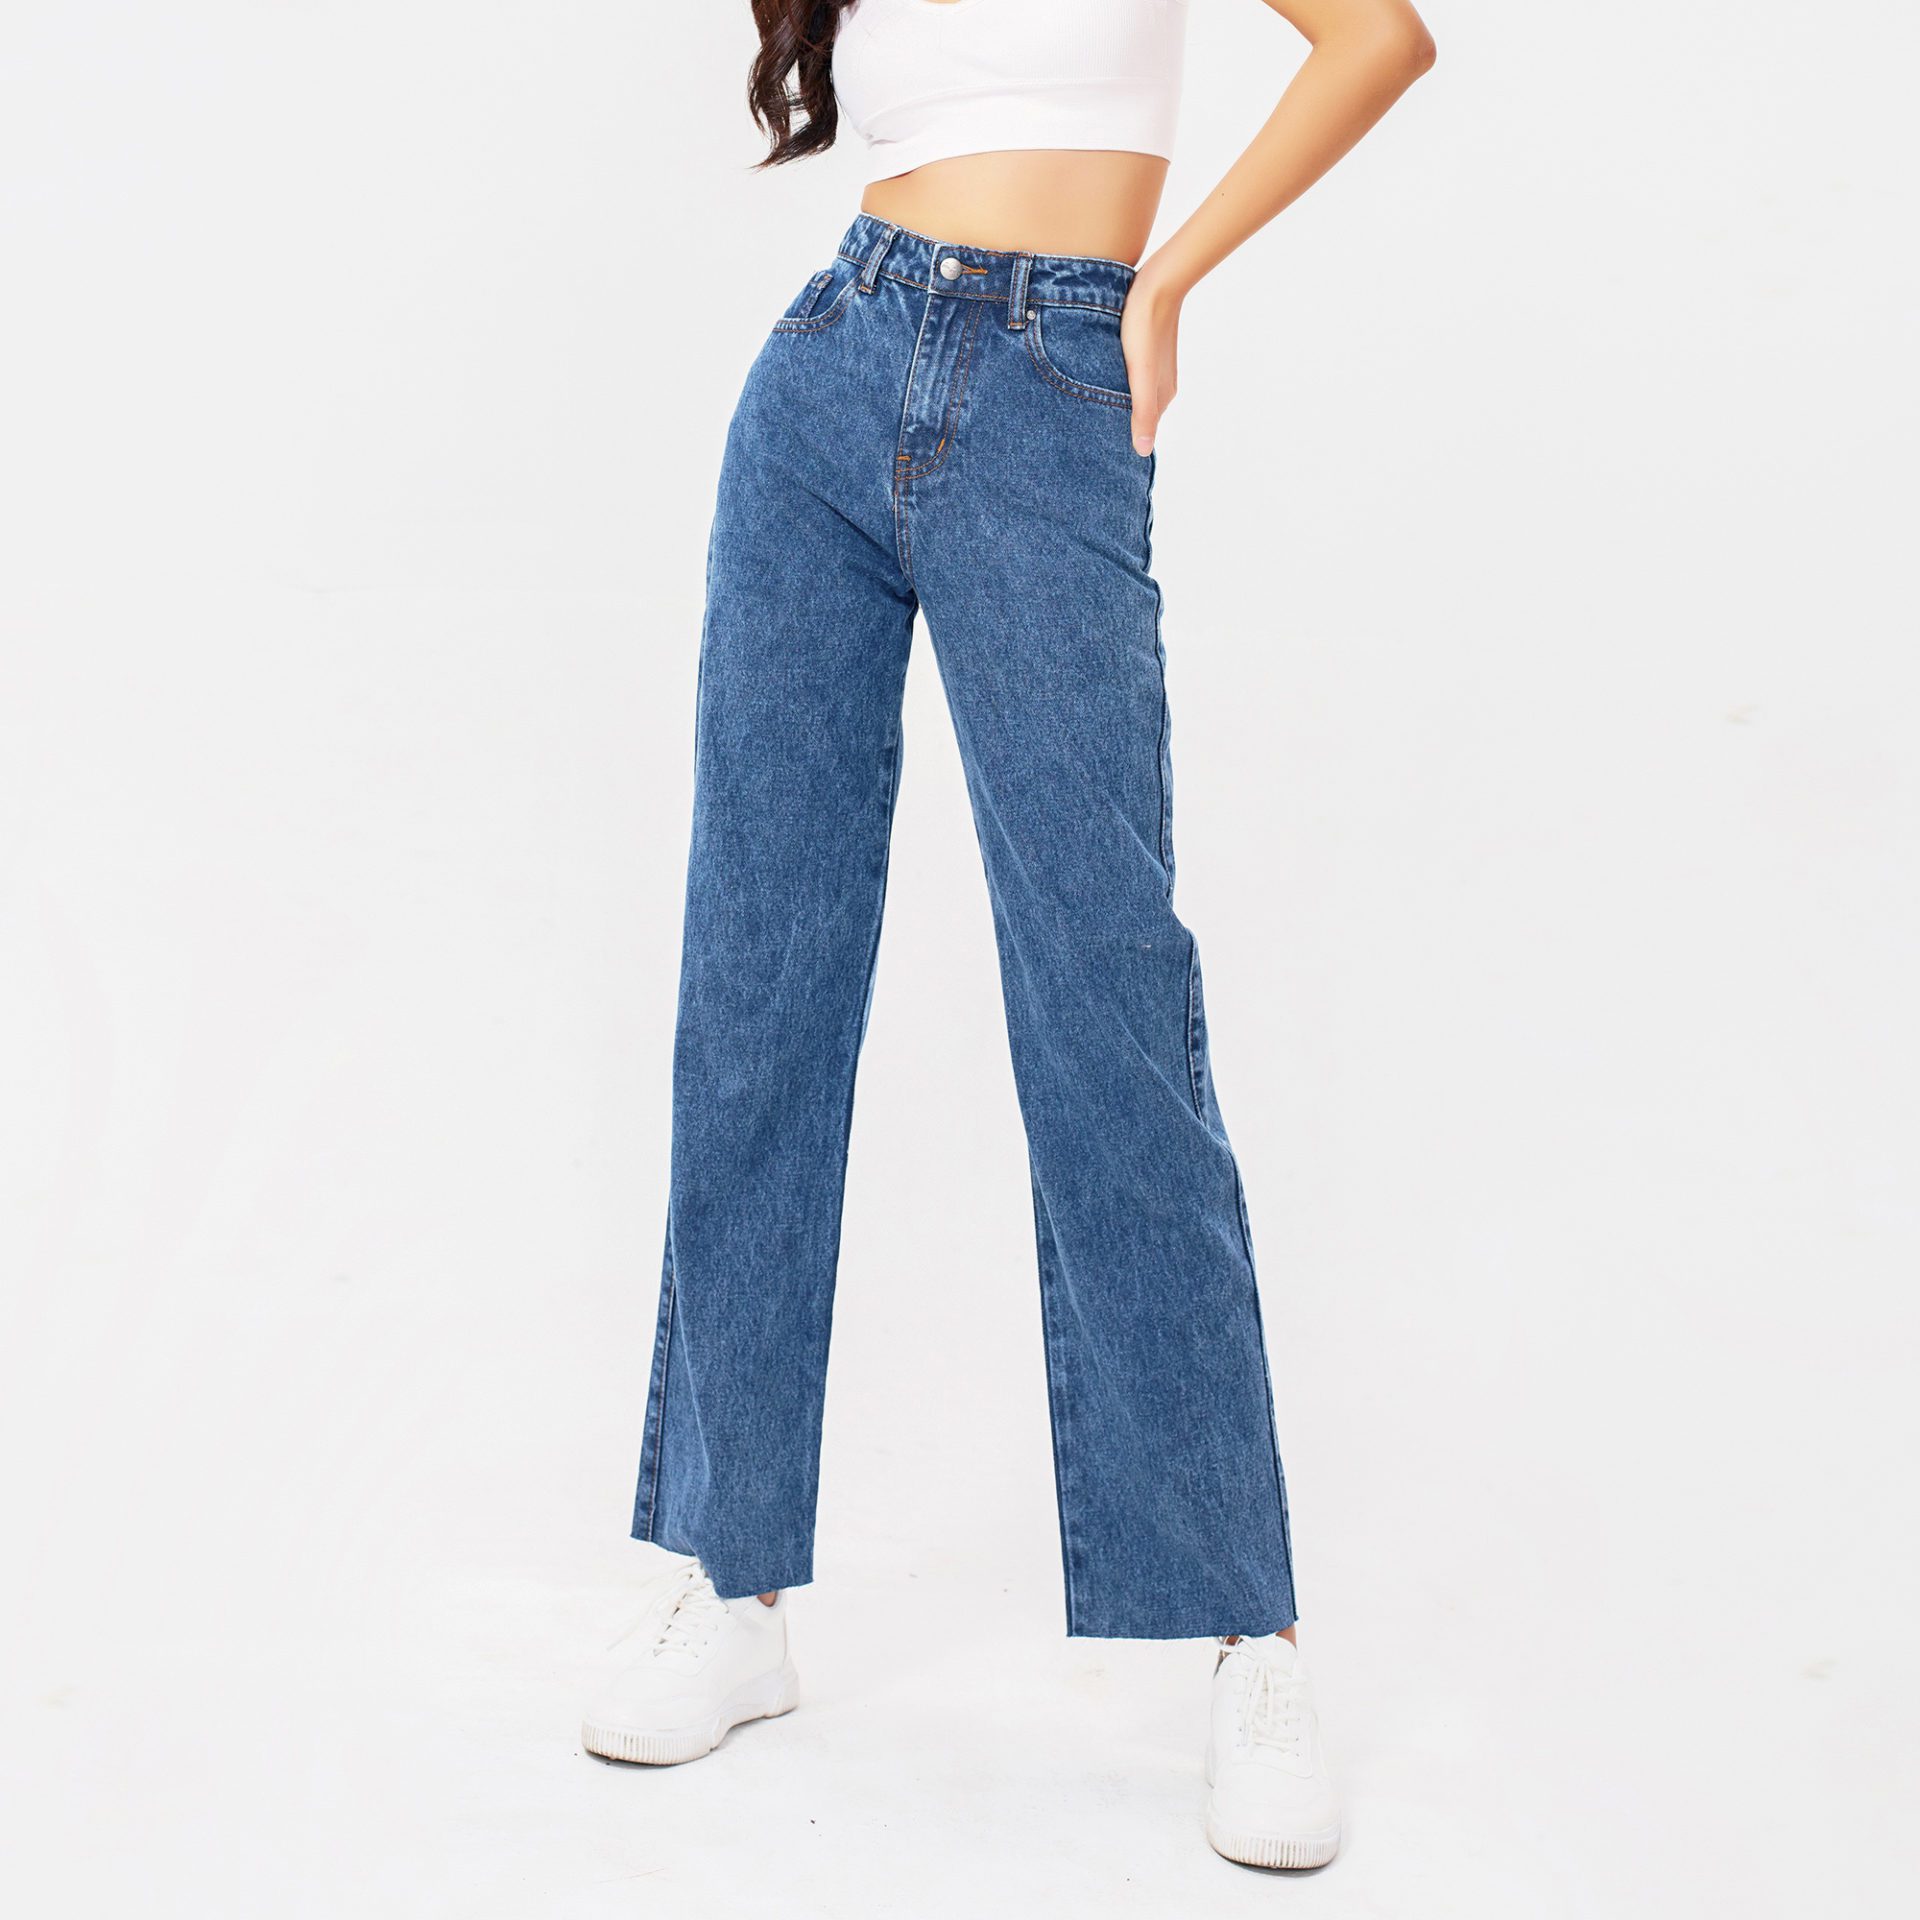 quần jeans ống rộng Aaa Jeans